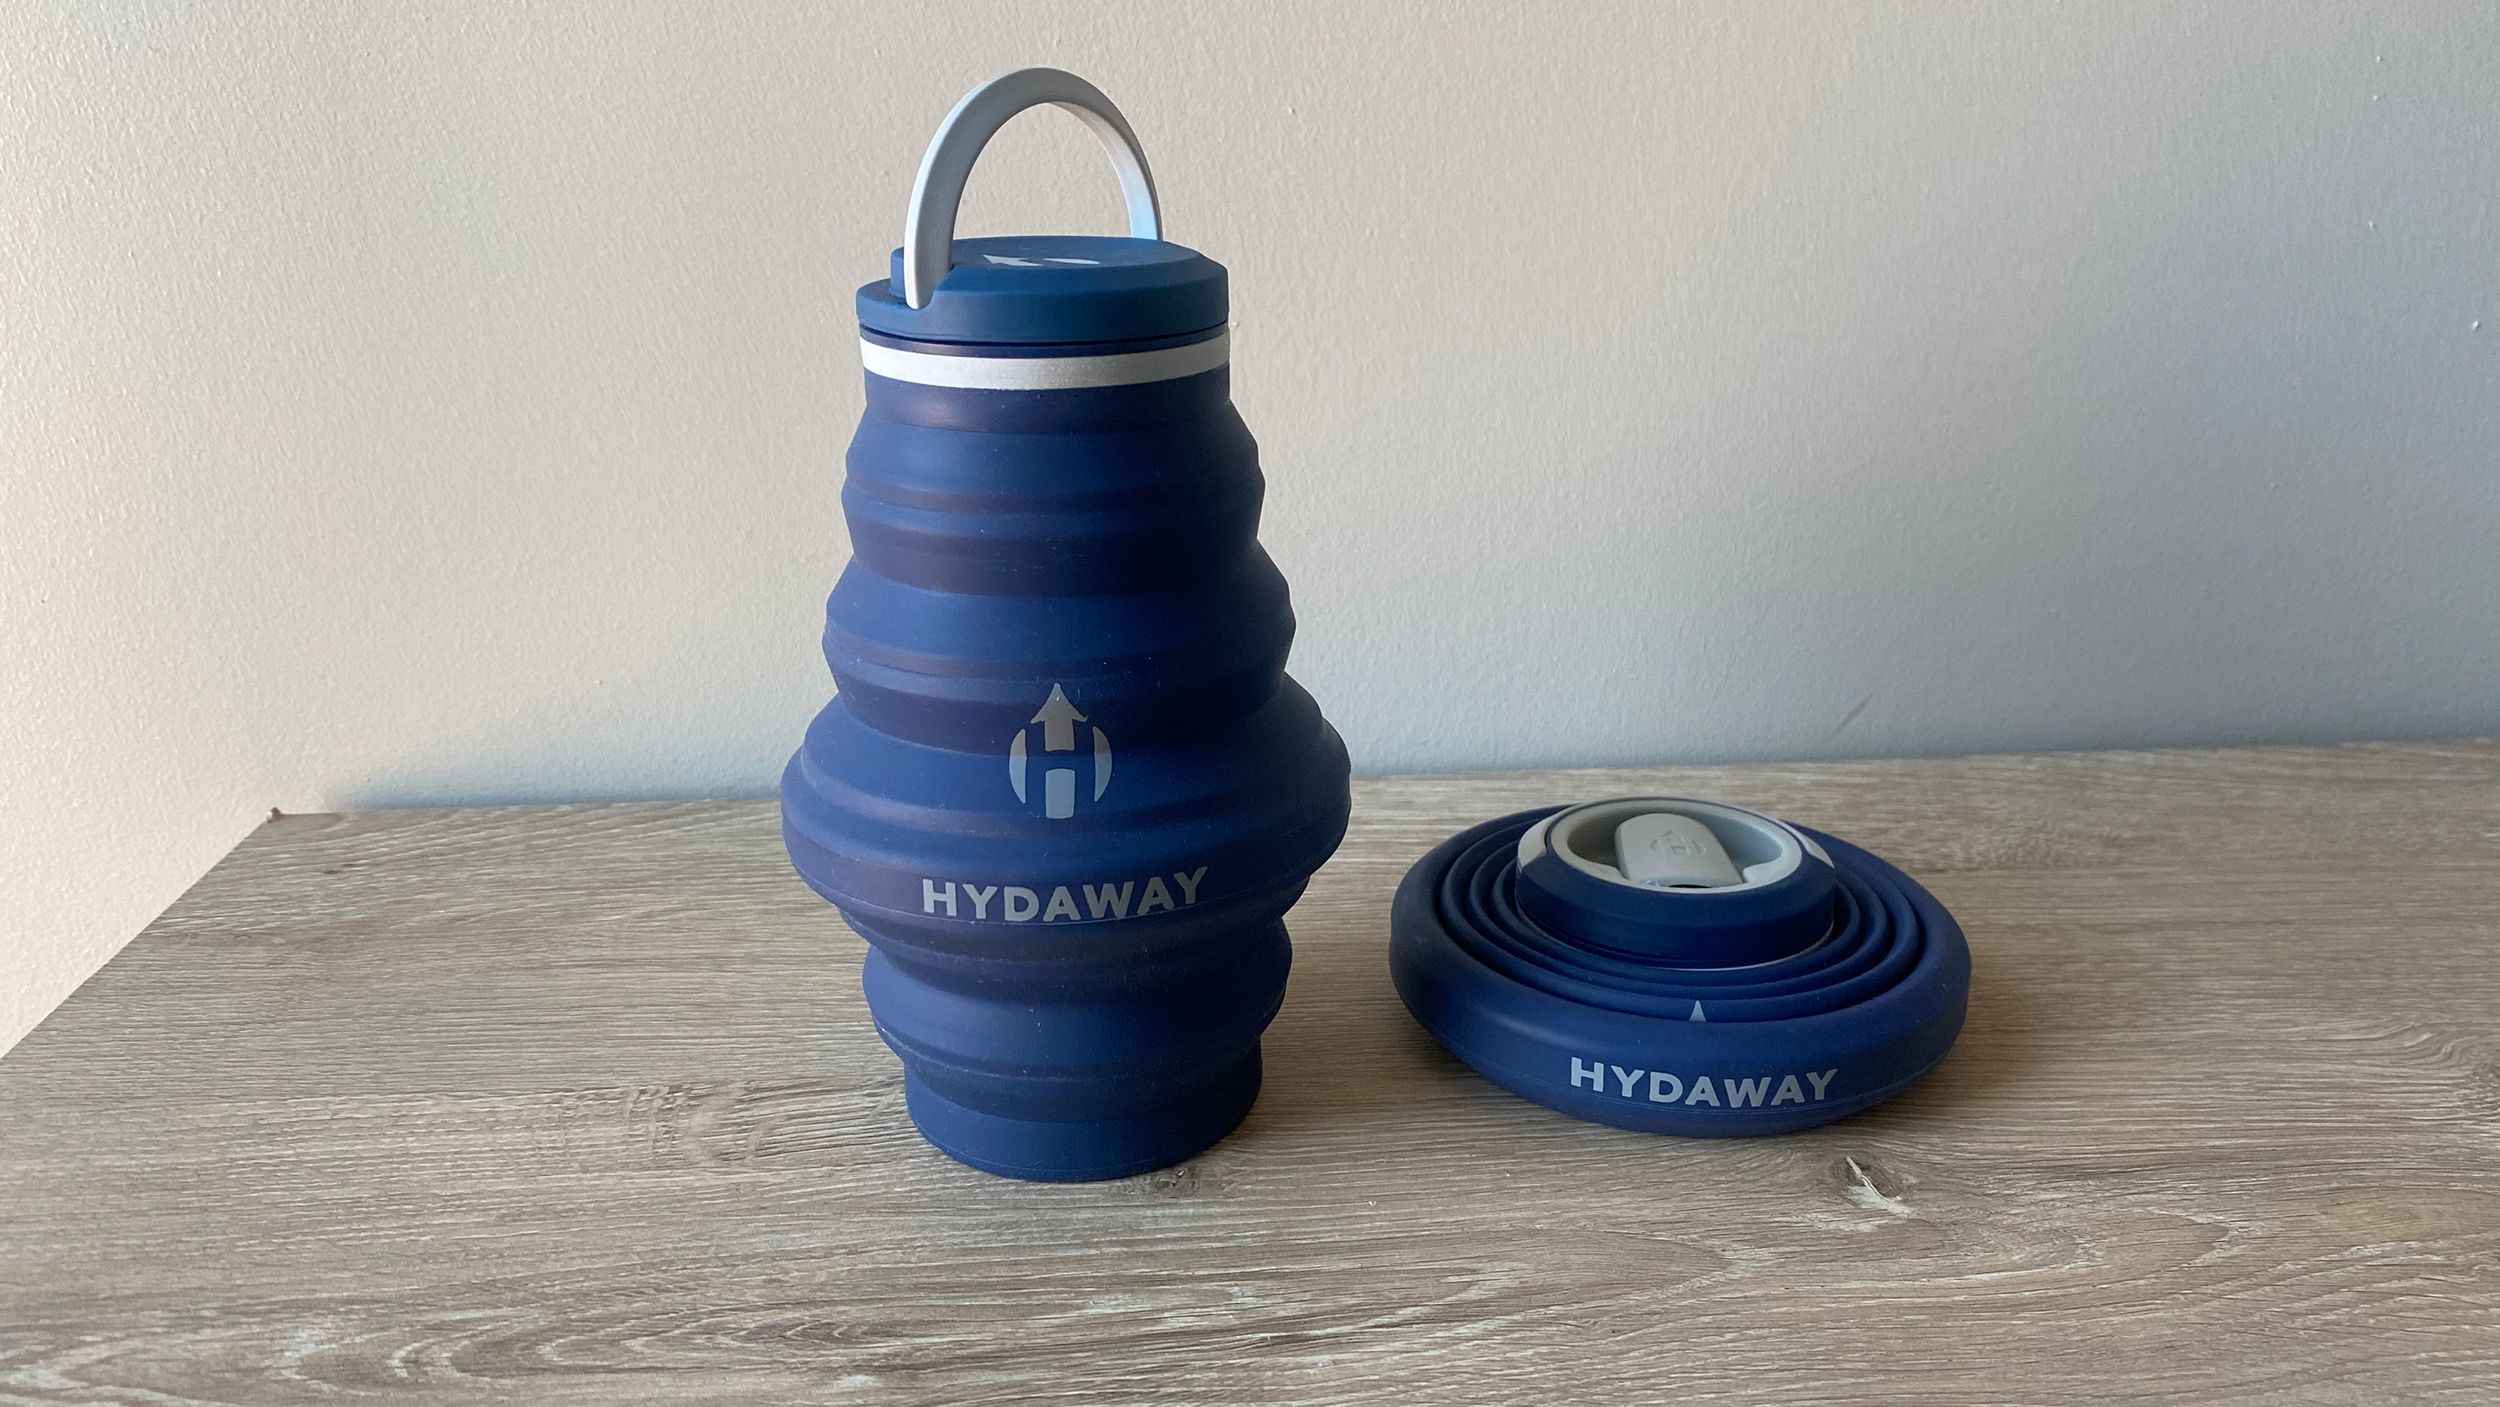 HYDAWAY Collapsible Water Bottle - 25oz I Reusable Water Bottle with Flip  Top Lid for Travel, Hiking…See more HYDAWAY Collapsible Water Bottle - 25oz